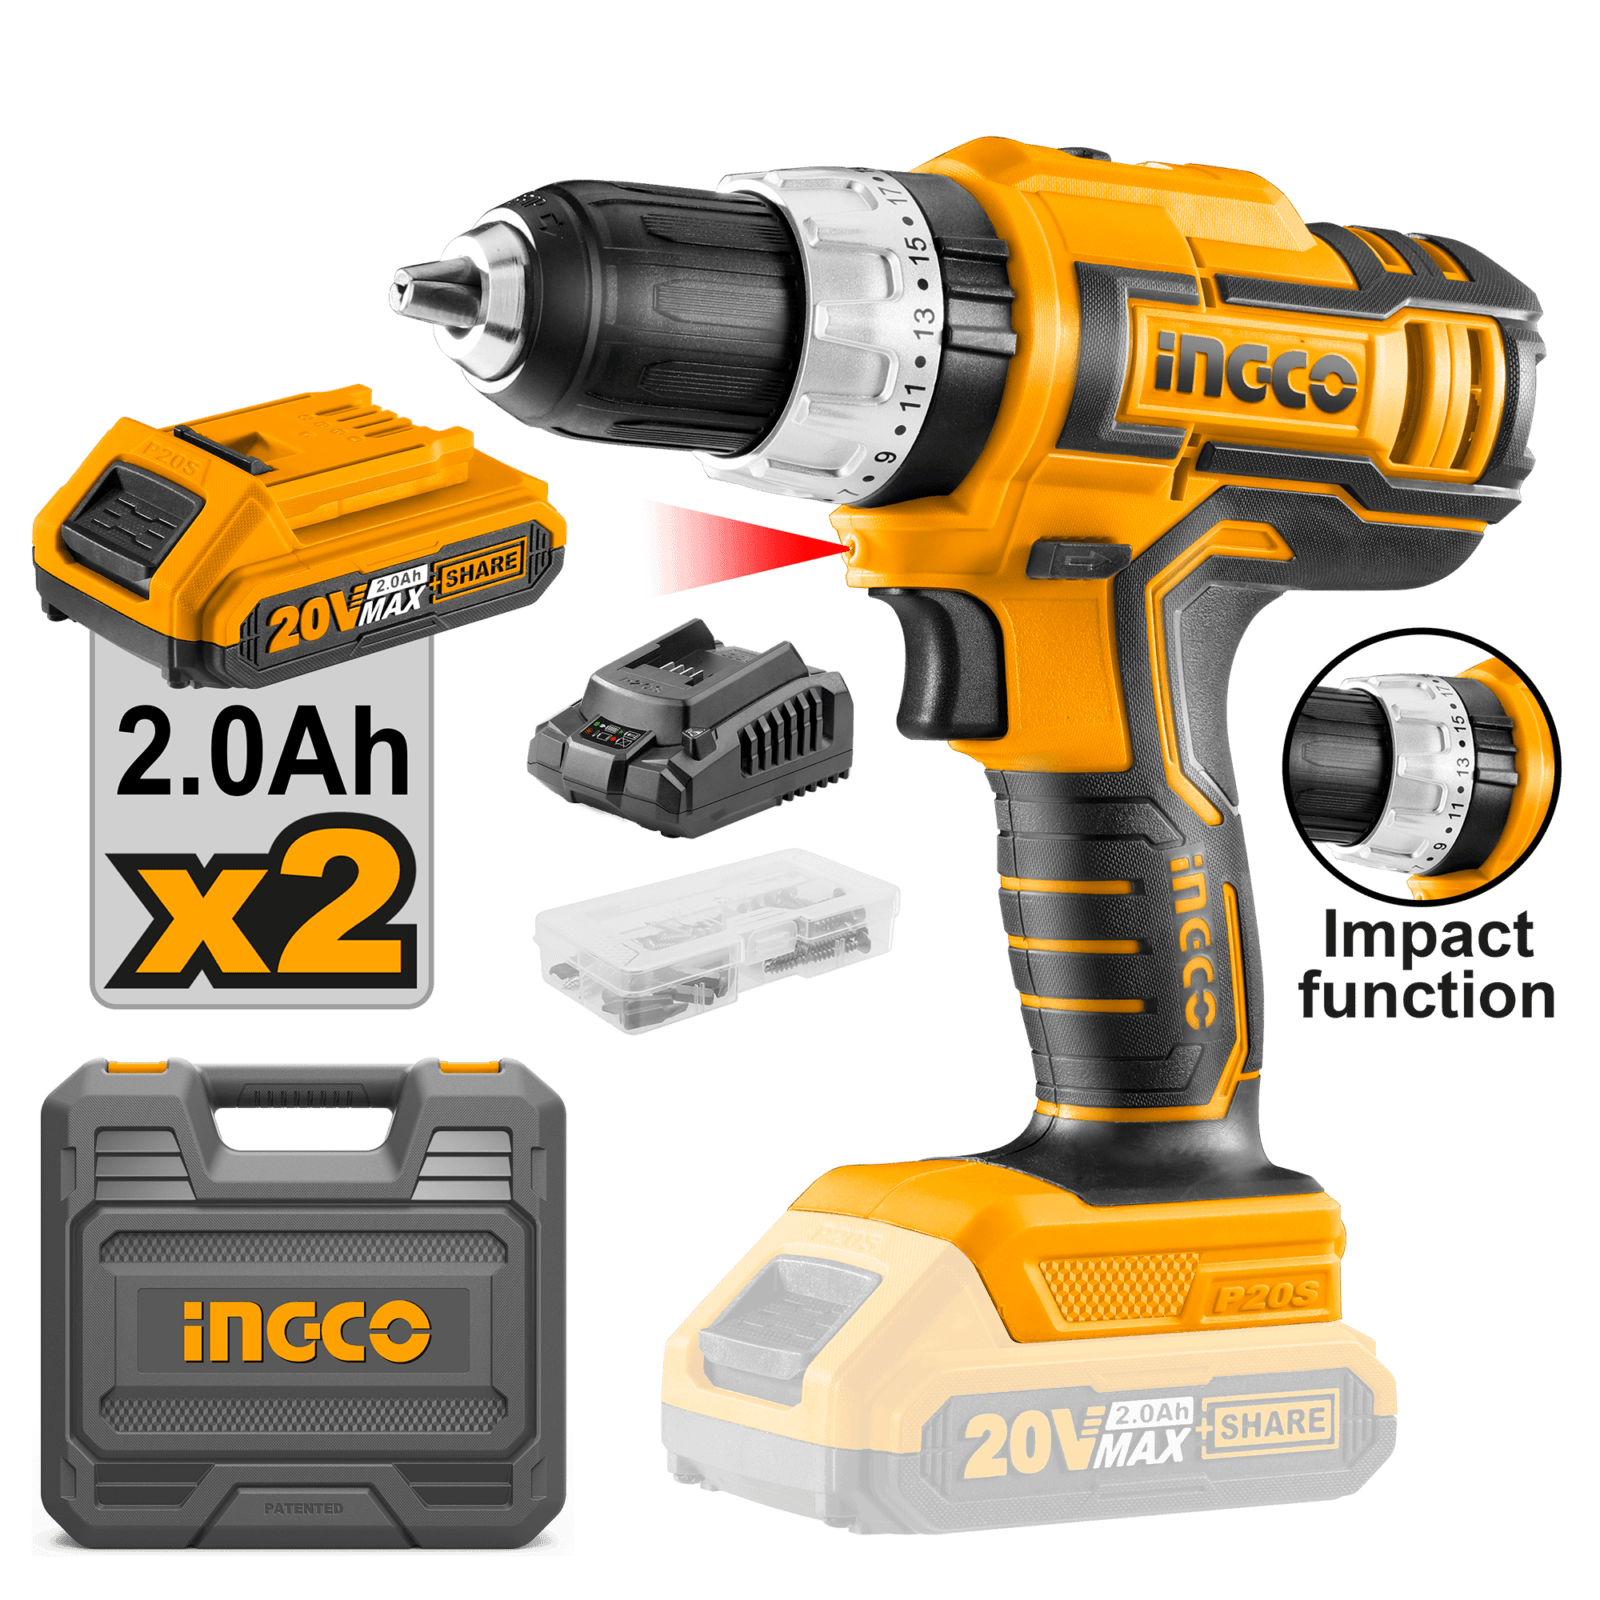 Ingco Lithium-Ion Cordless Drill with Two 20V Batteries - CIDLI20031 | Buy Online in Accra, Ghana - Supply Master Drill Buy Tools hardware Building materials